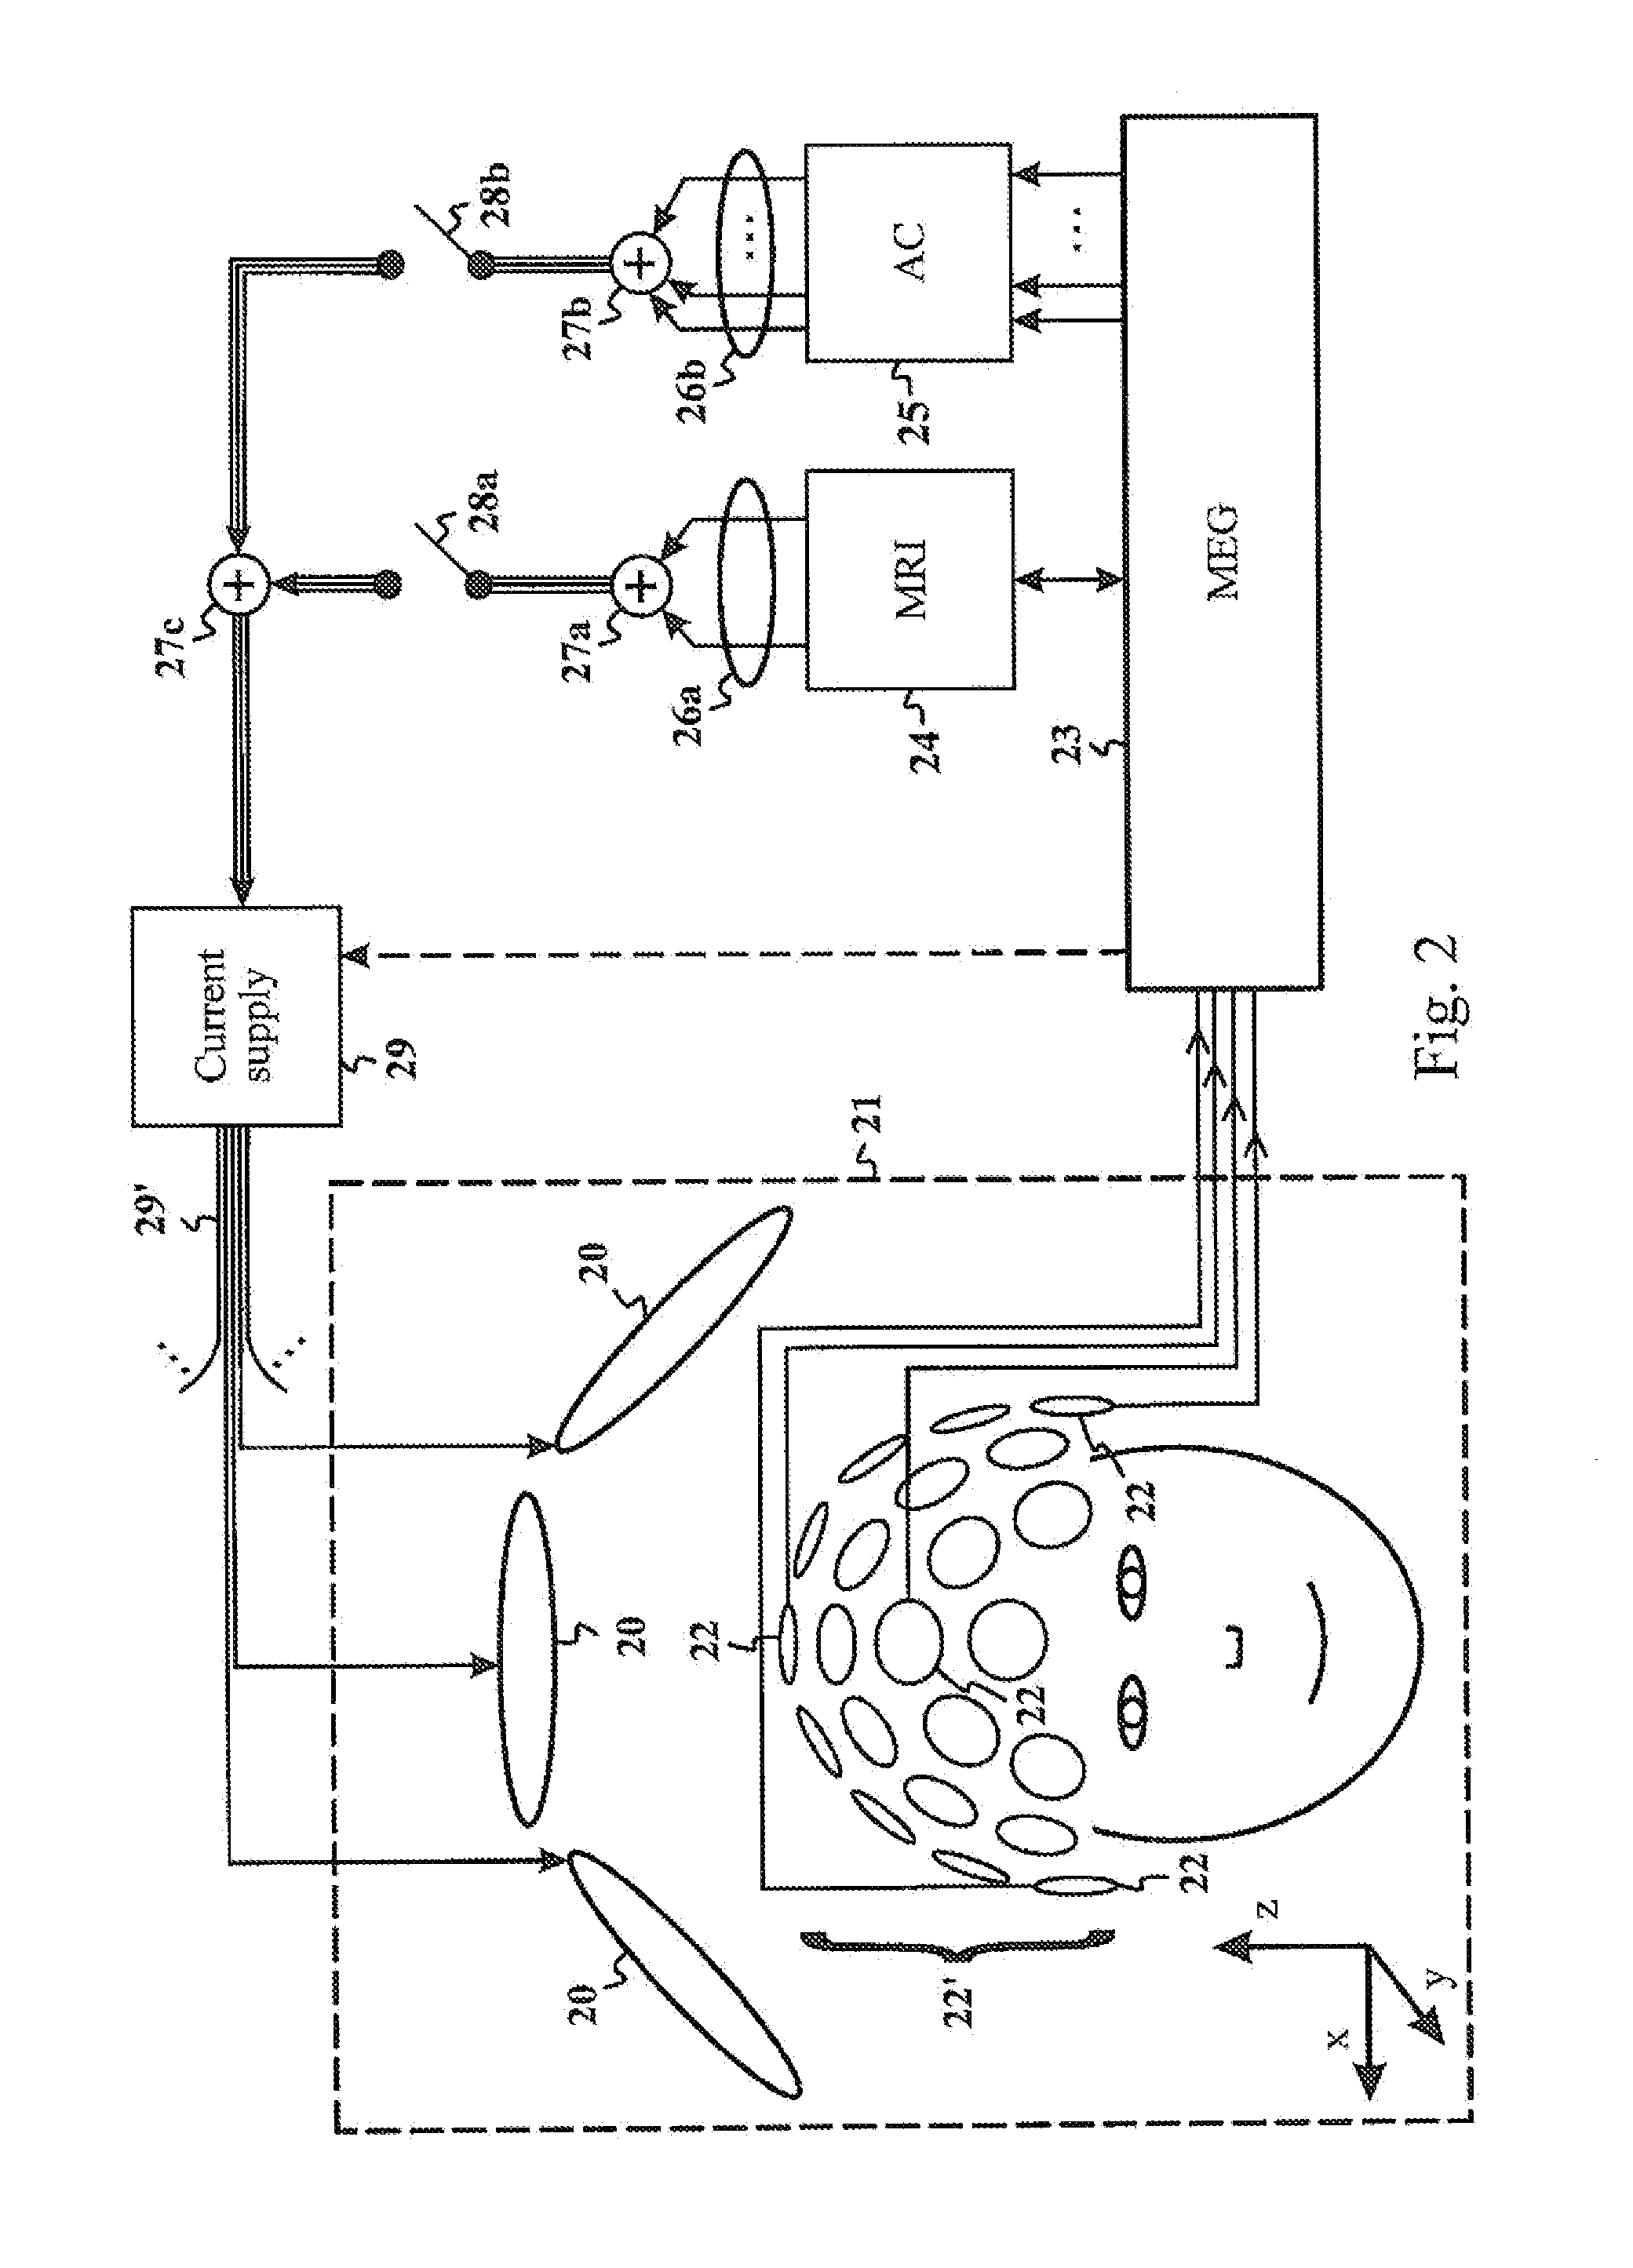 Method for designing coil systems for generation of magnetic fields of desired geometry, a magnetic resonance imaging or magnetoencephalography apparatus with a coil assembly and a computer program